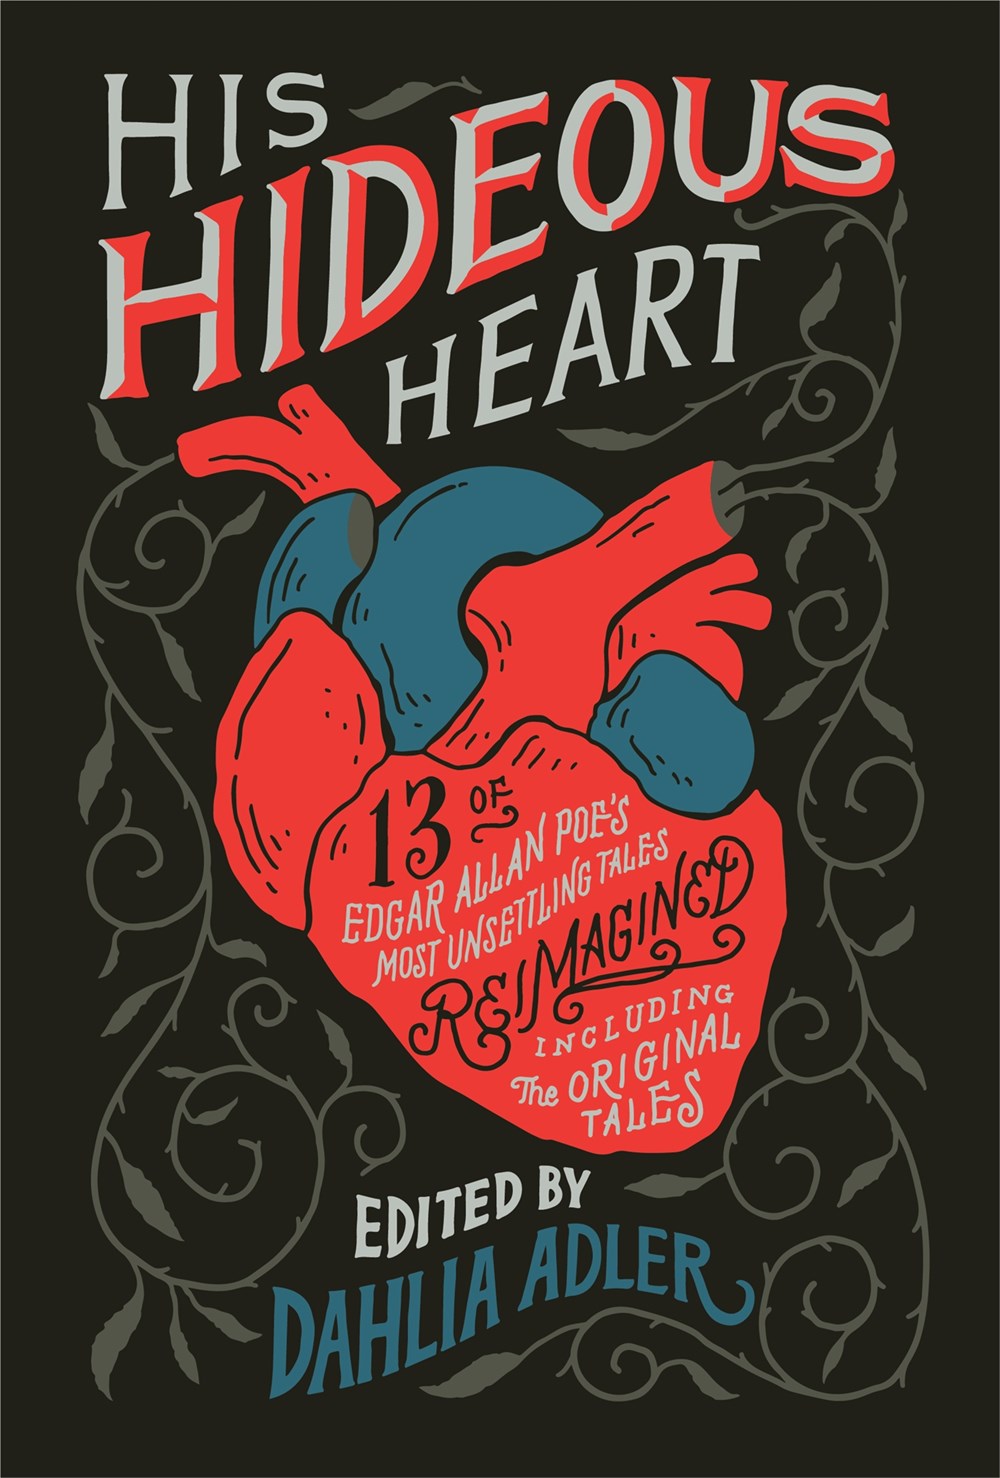 His Hideous Heart : 13 of Edgar Allan Poe's Most Unsettling Tales Reimagined